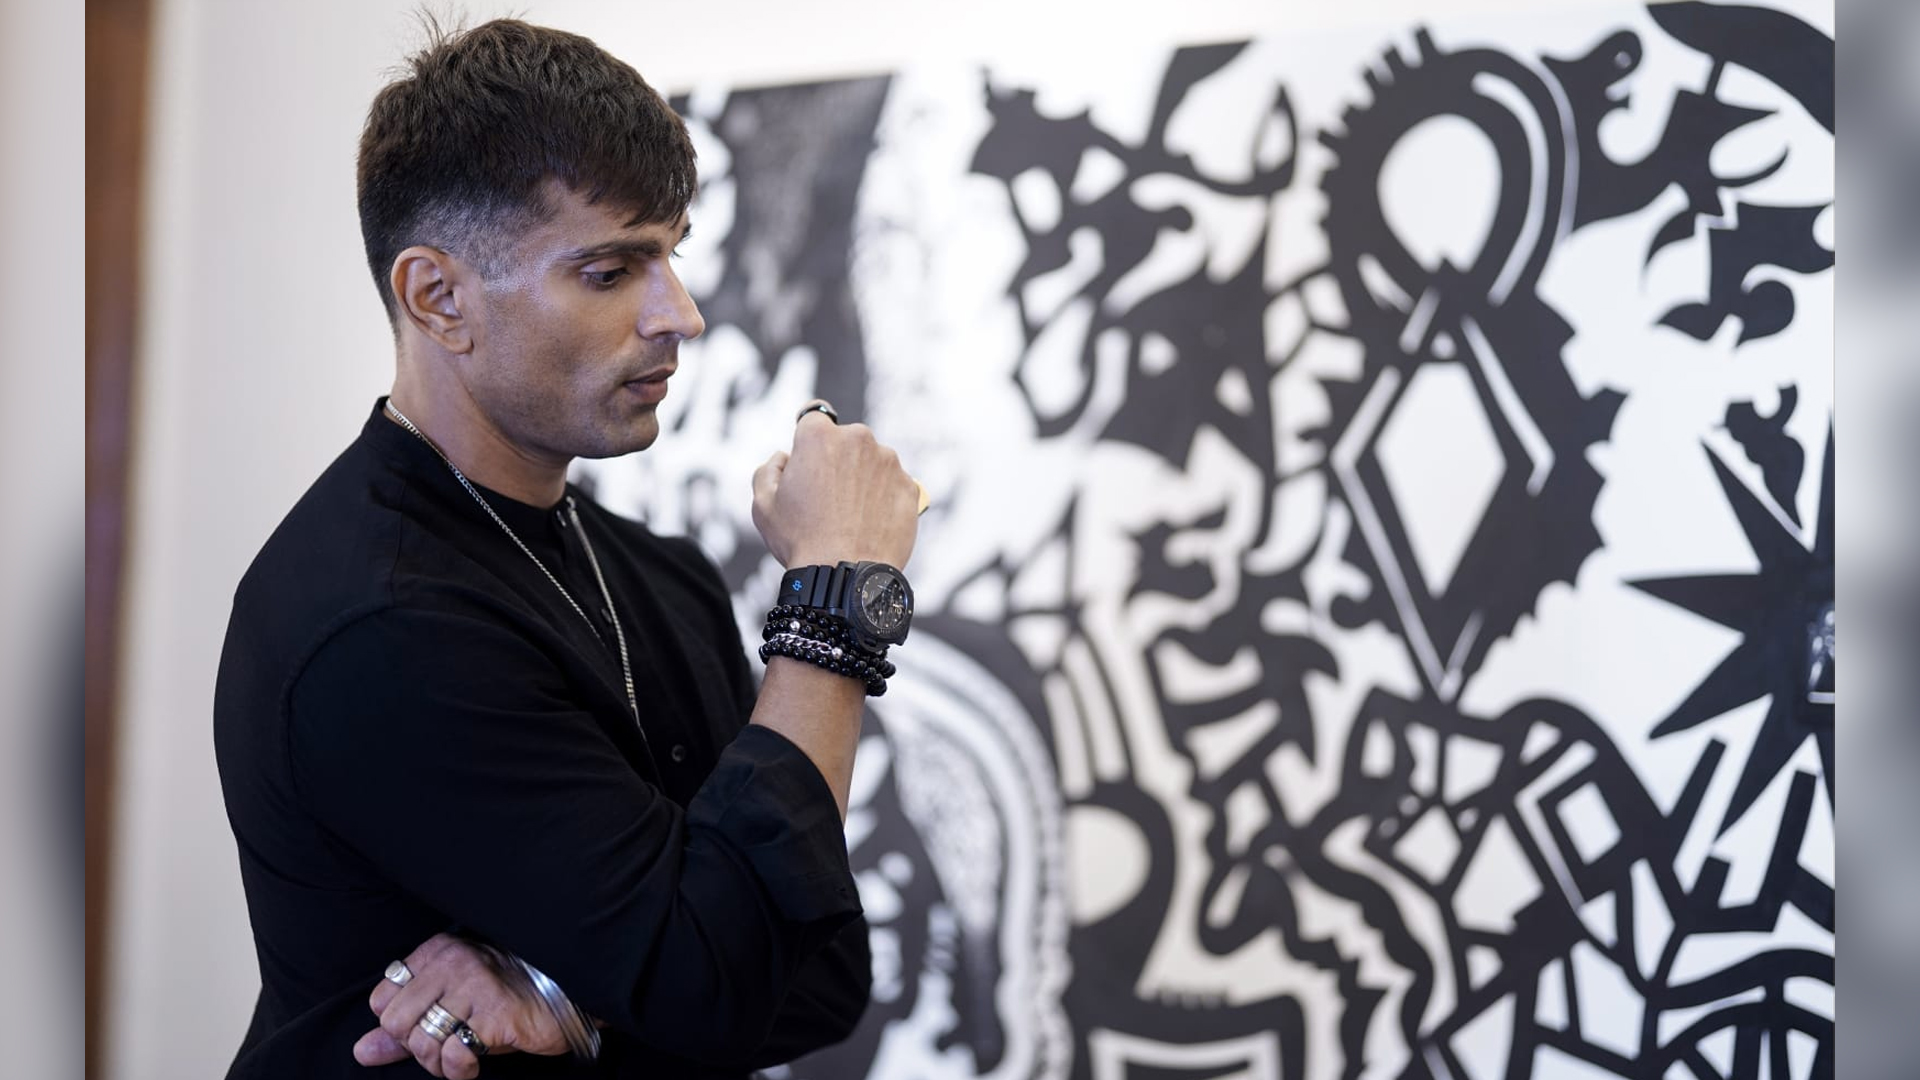 The actor-turned-artist Karan Singh Grover’s virtual art exhibition ‘Fifth Density’ goes live